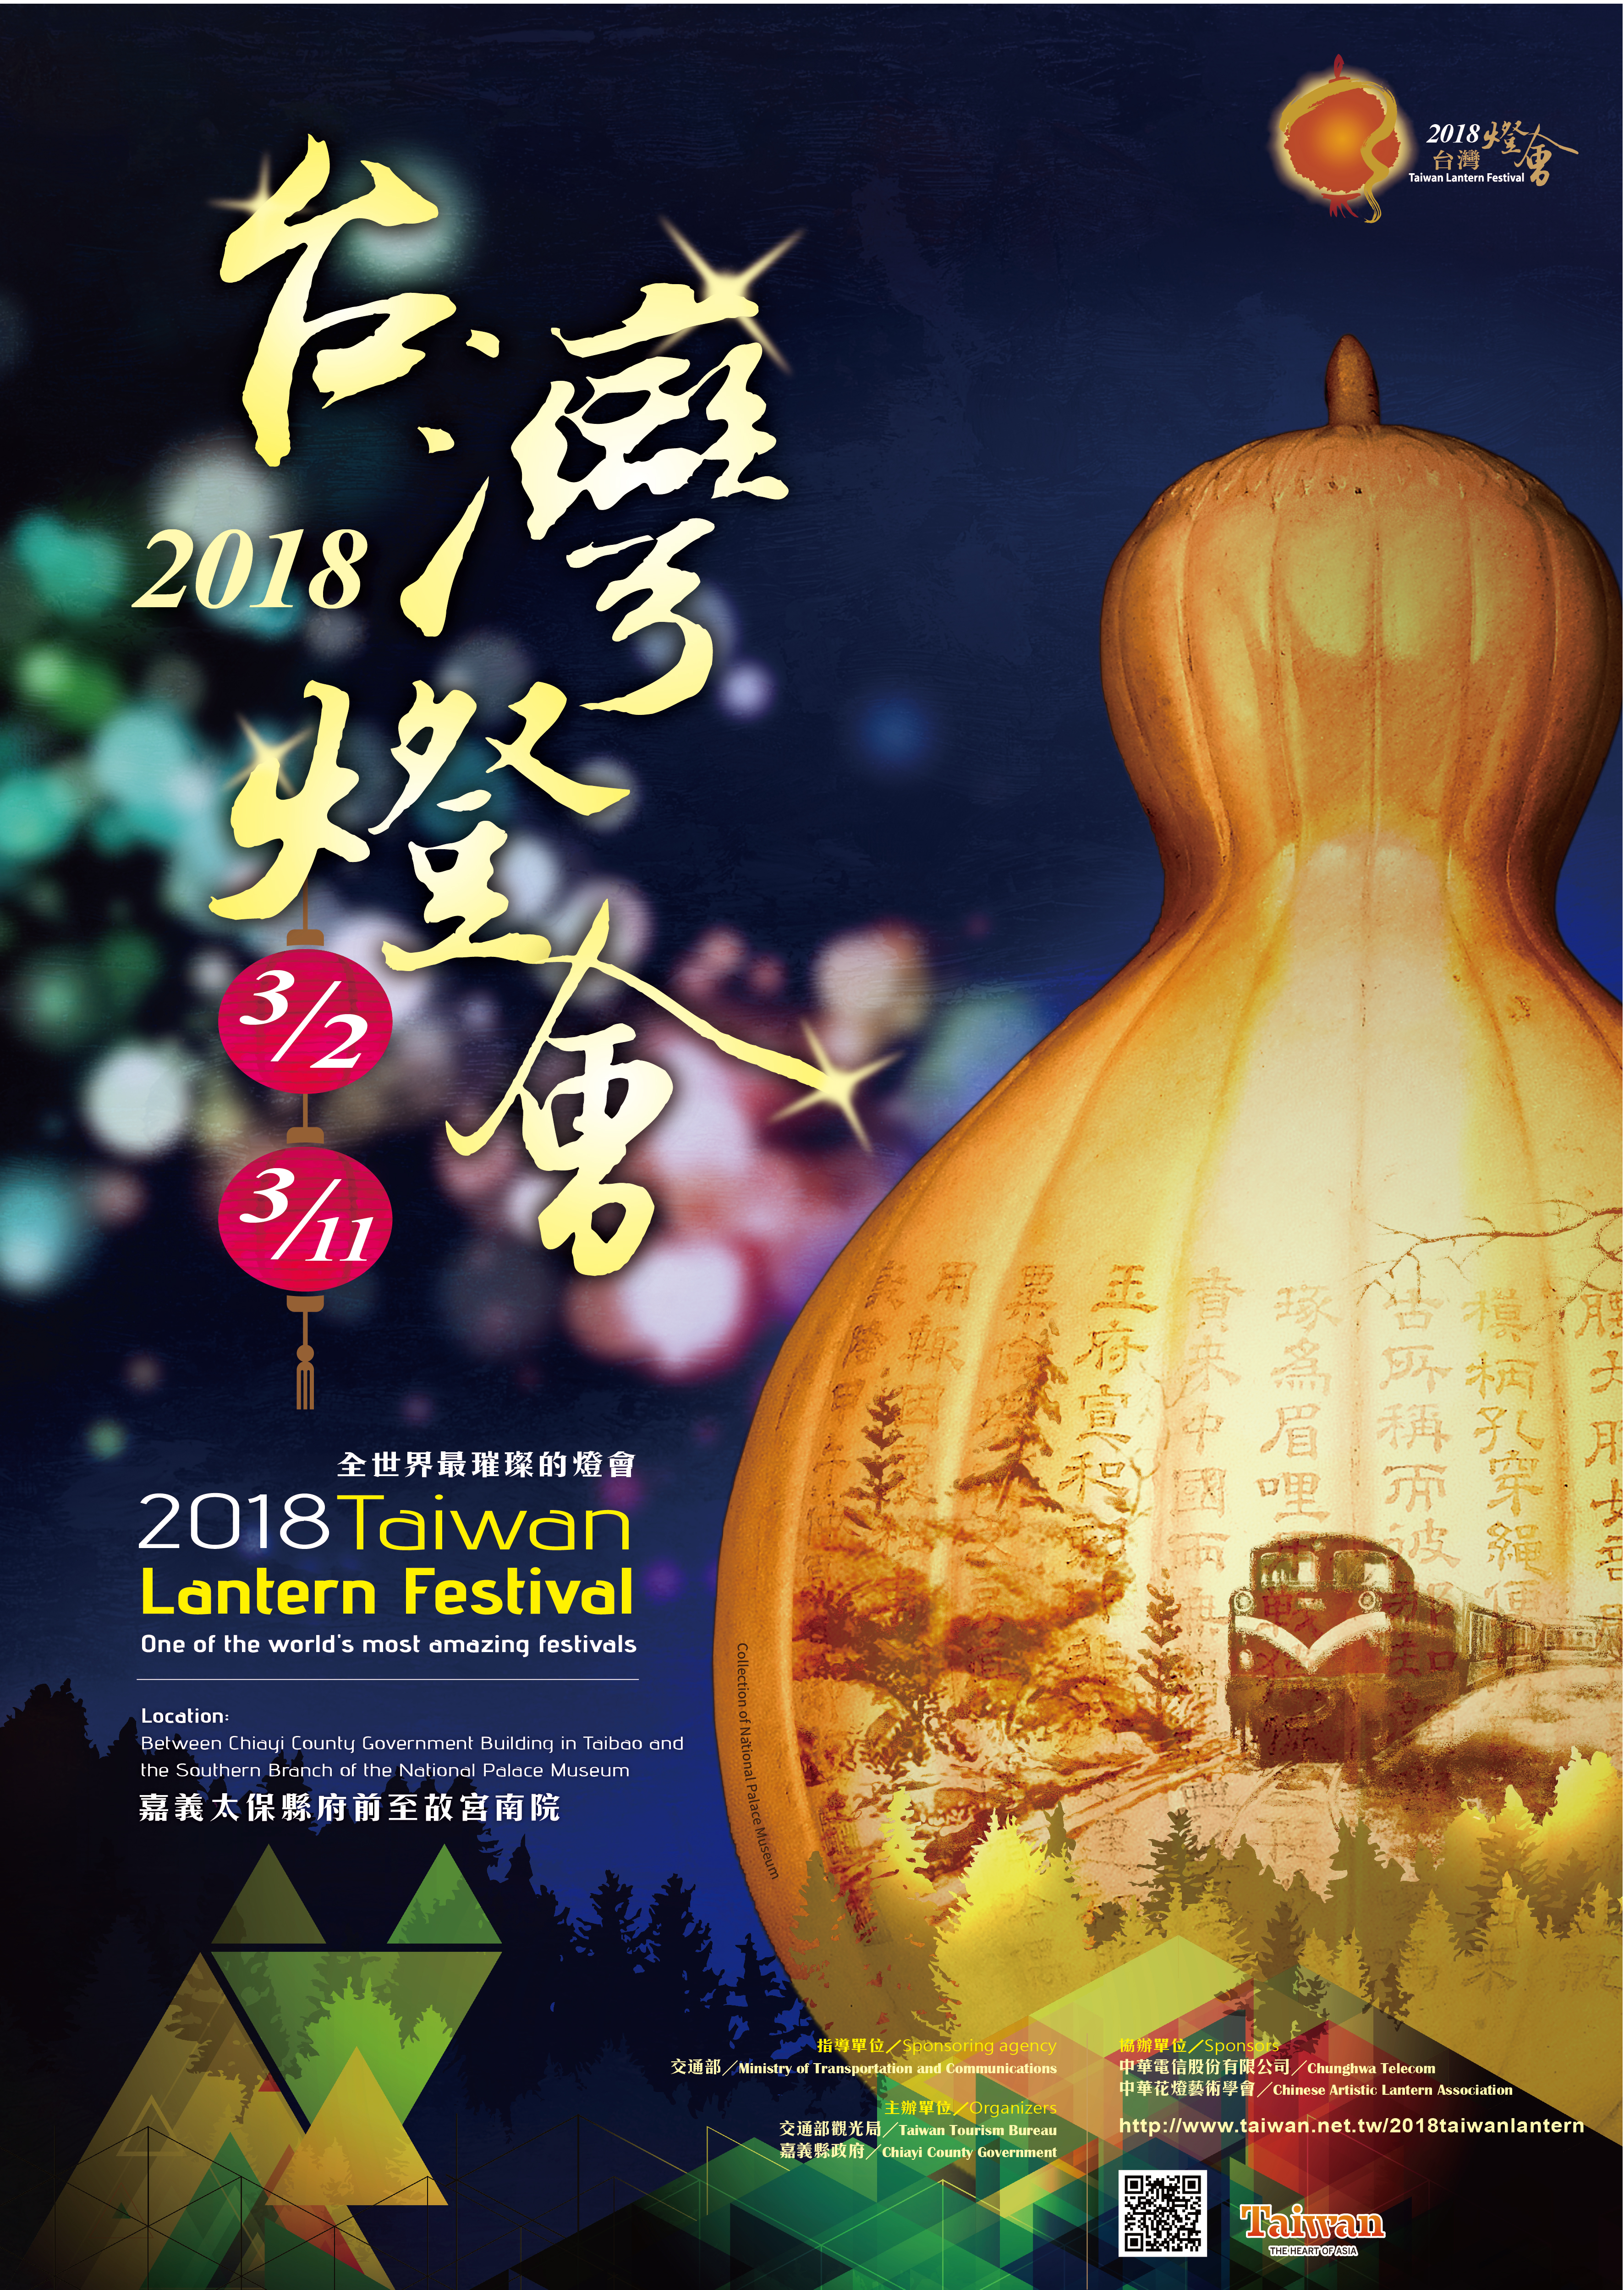 Official poster of the 2018 Taiwan Lantern Festival.